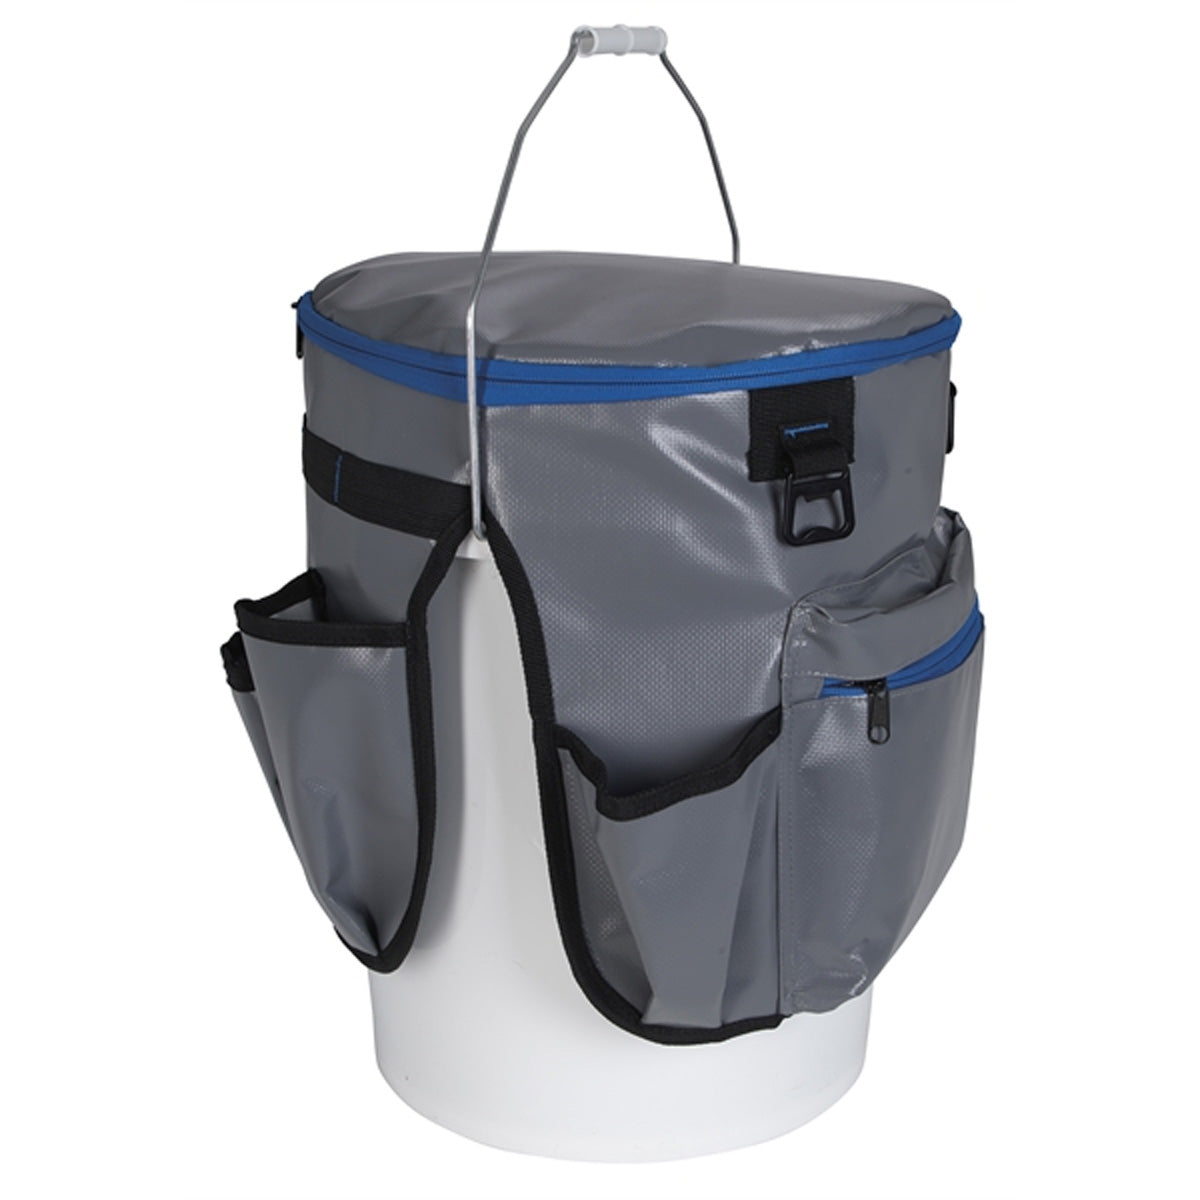 Koozie Insulated Cooler Bag – Holds 5 Gallon Ice Bucket